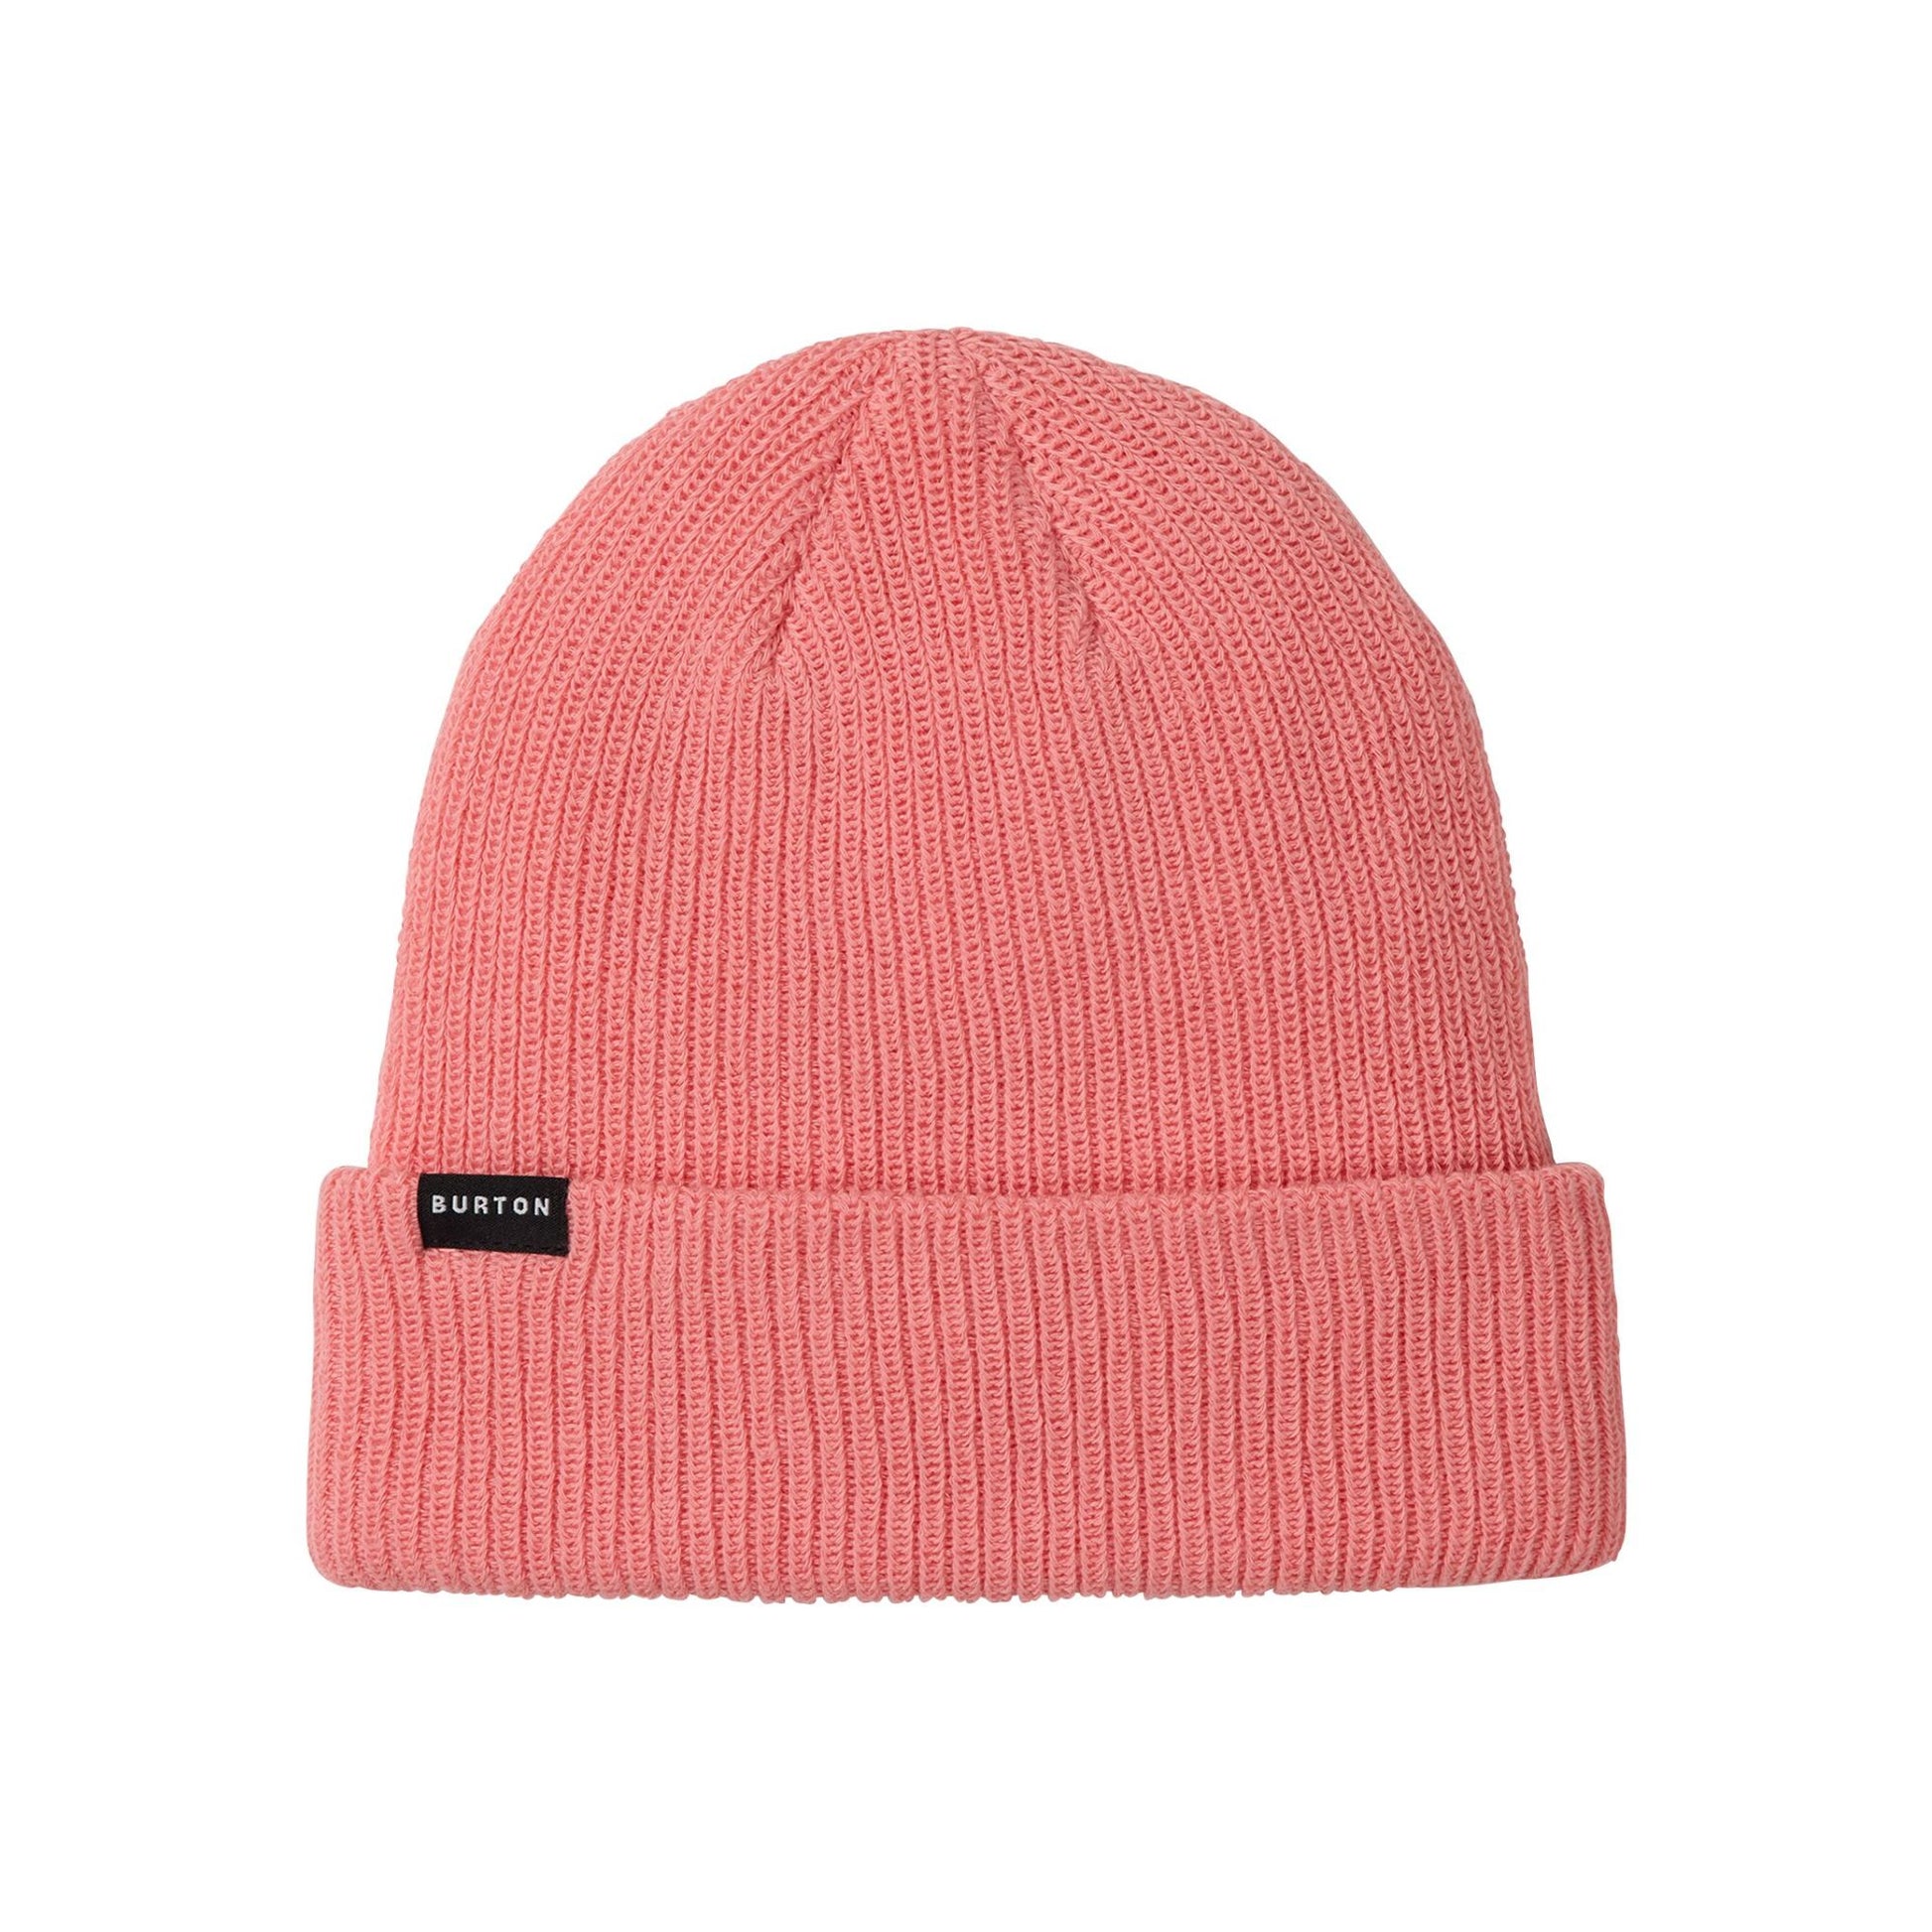 Burton Recycled All Day Long Beanie Reef Pink OS Beanies